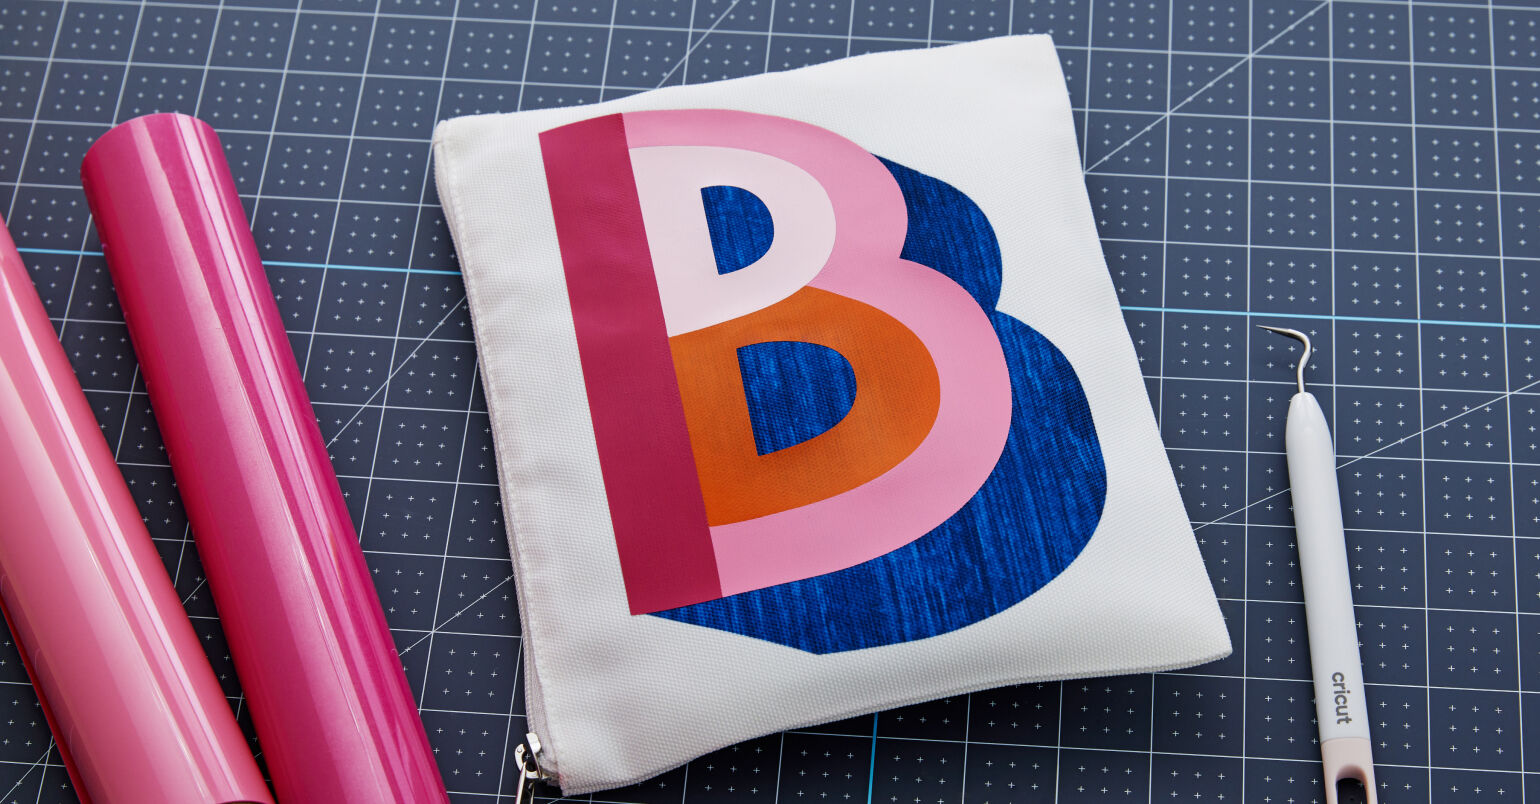 Makeup bag with a monogrammed letter "B"